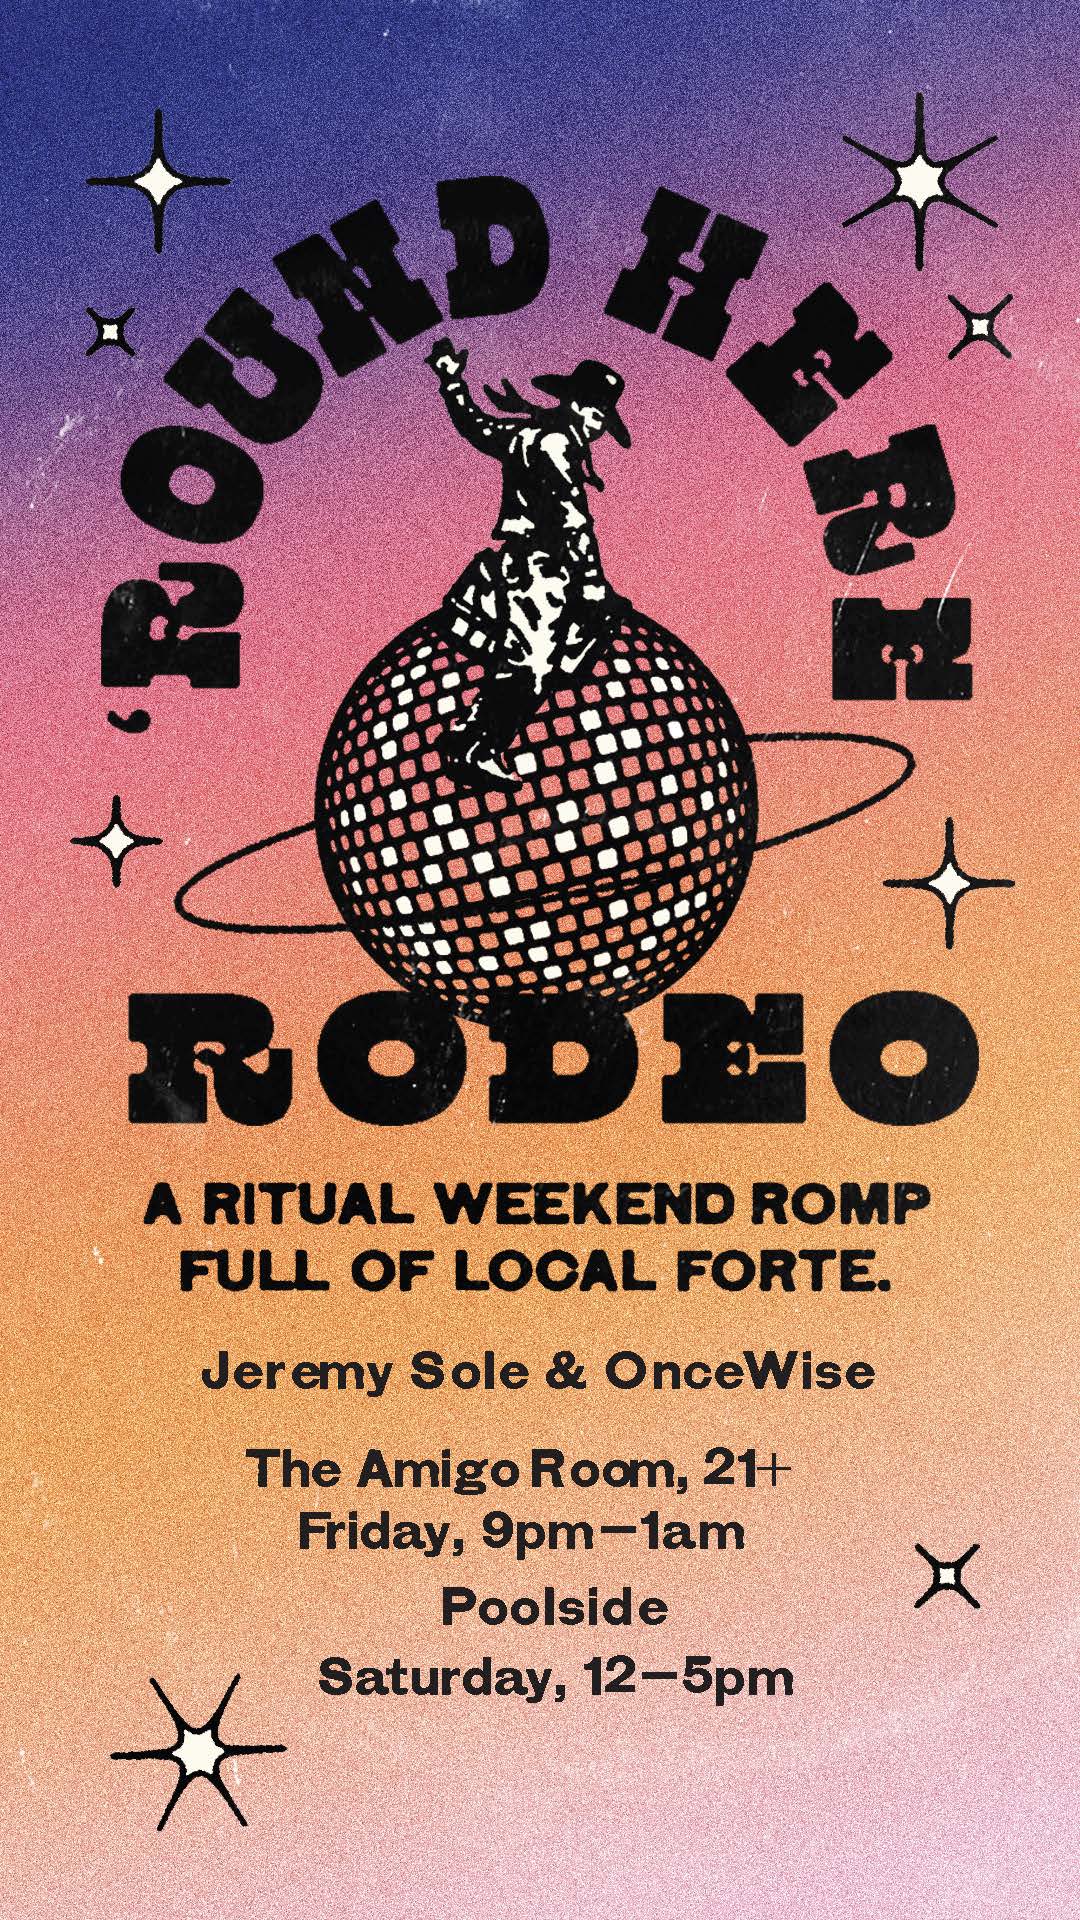 Pink and orange back ground with black text the says round here rodeo. there is a cowboy riding a disco ball.